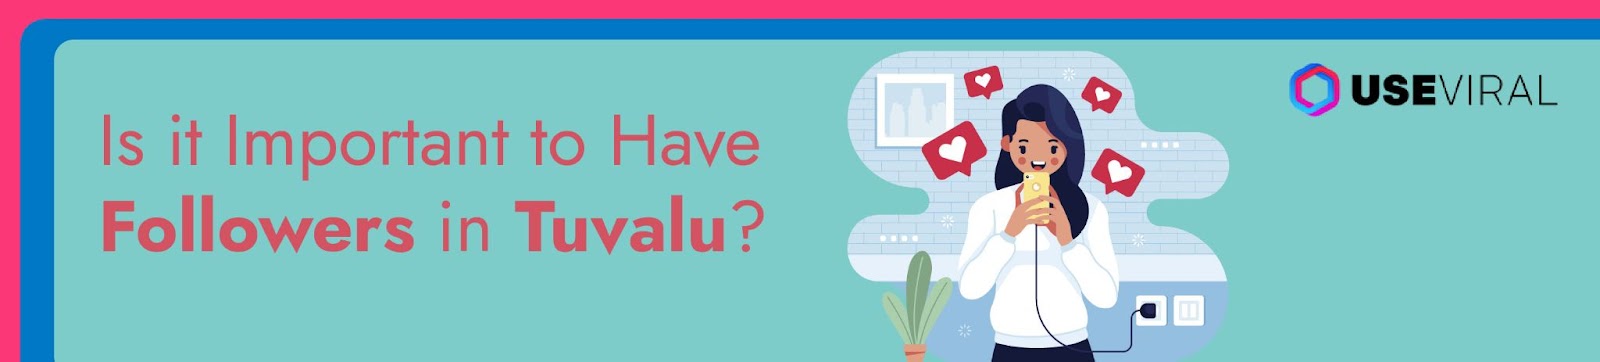 Is it Important to Have Followers in Tuvalu?